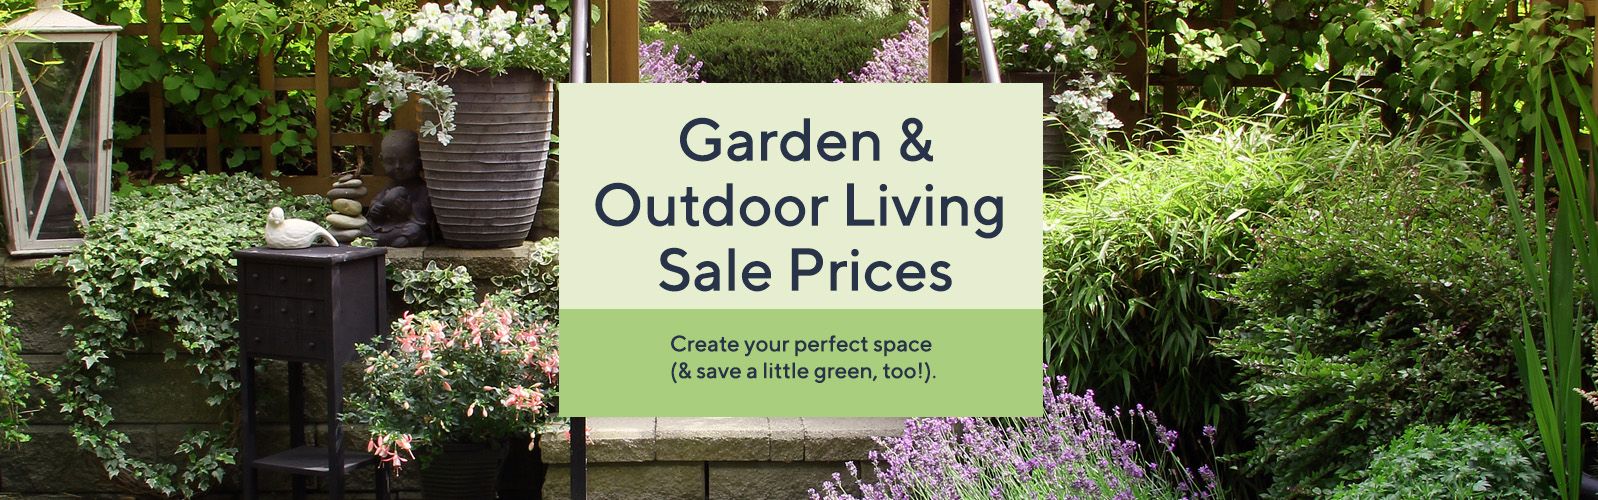 Garden & Outdoor Living Sale Prices - Create your perfect space (& save a little green, too!). 